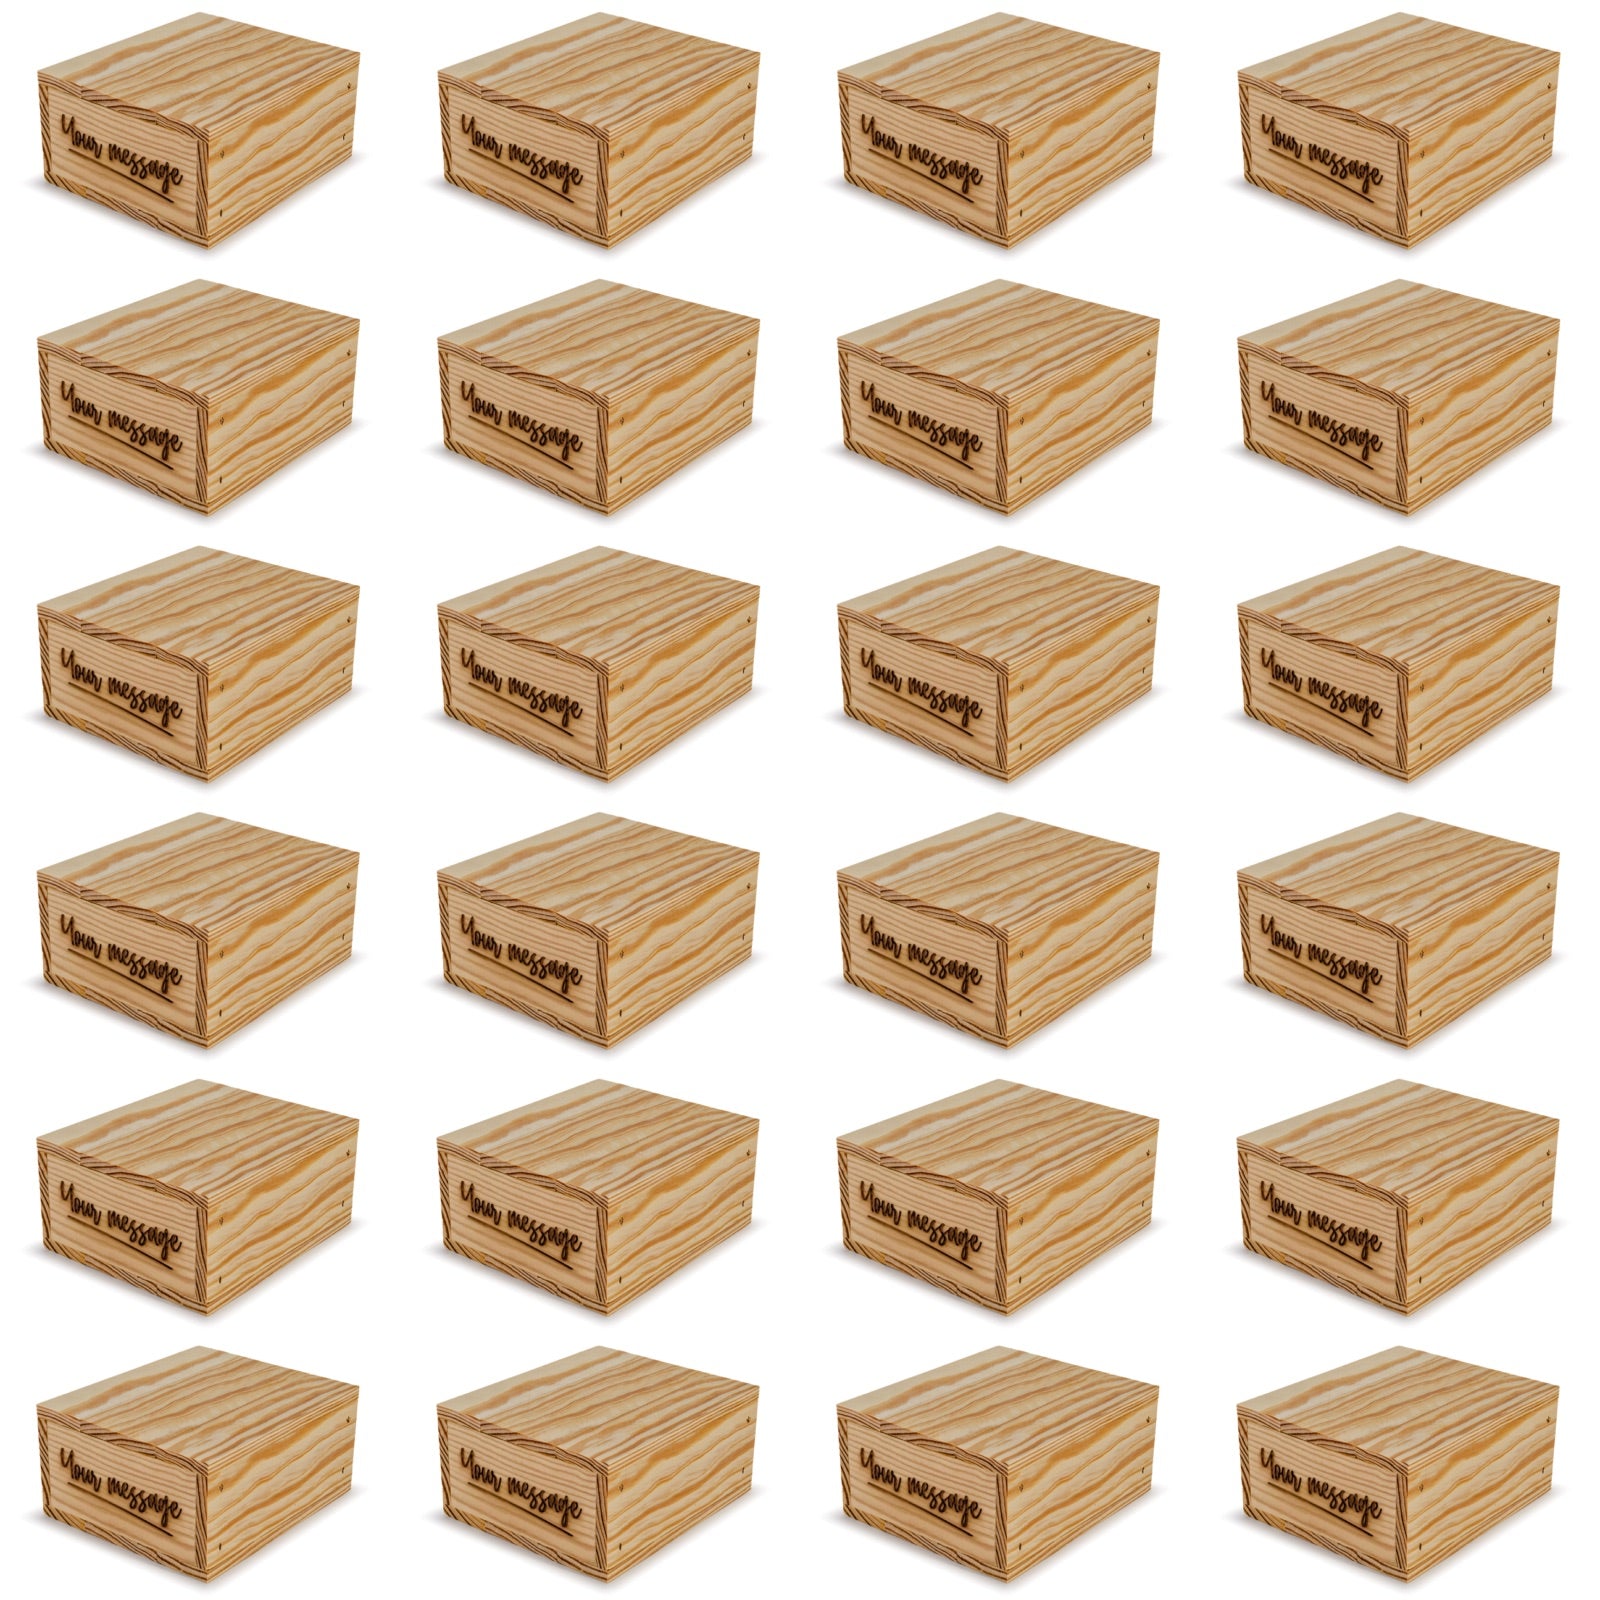 24 Small wooden crates with lid and custom message 6x5.5x2.75